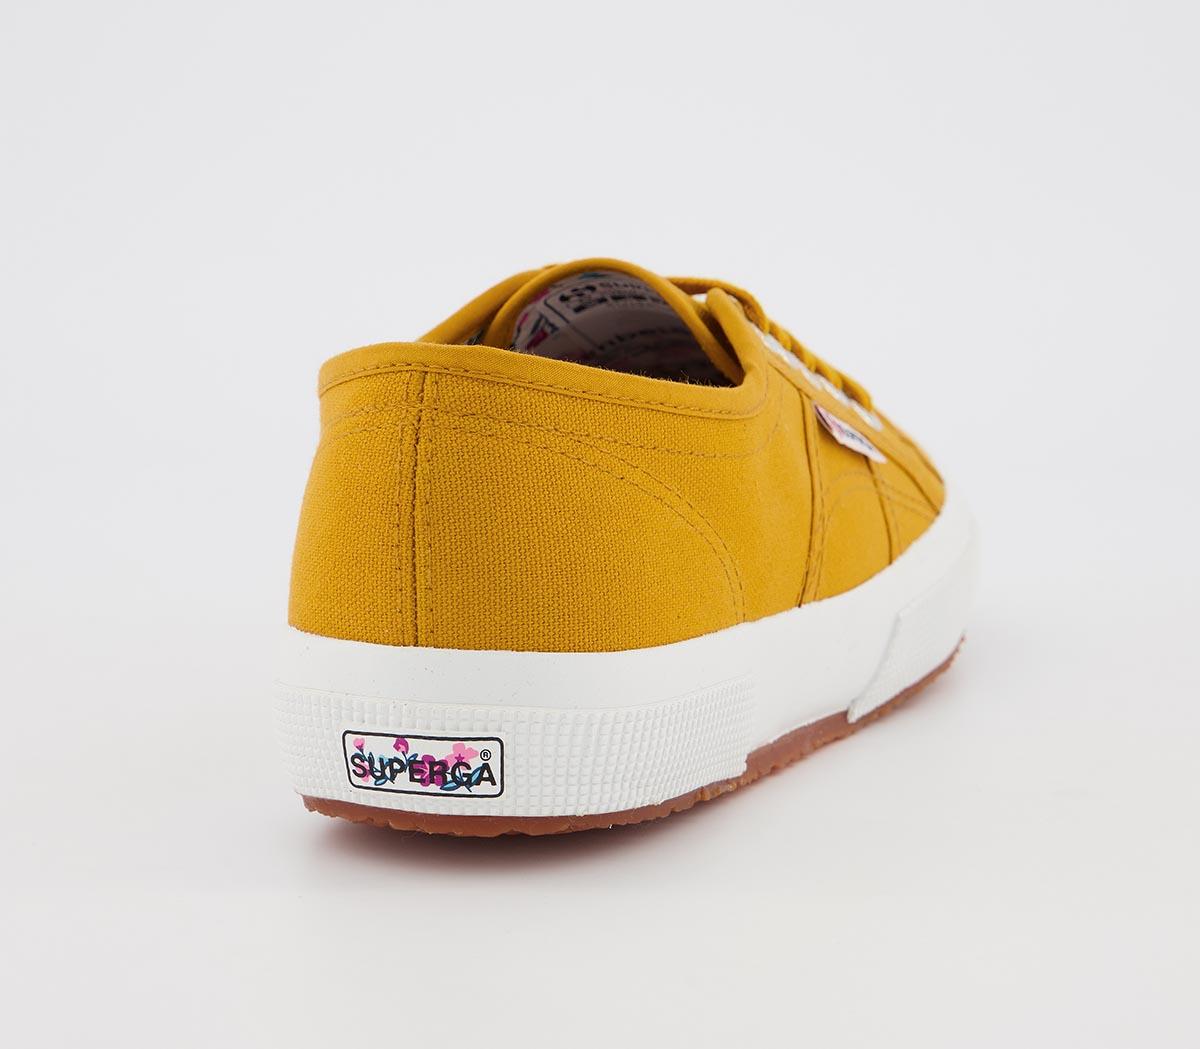 Superga 2750 Trainers Yellow Floral Exclusive - Hers trainers